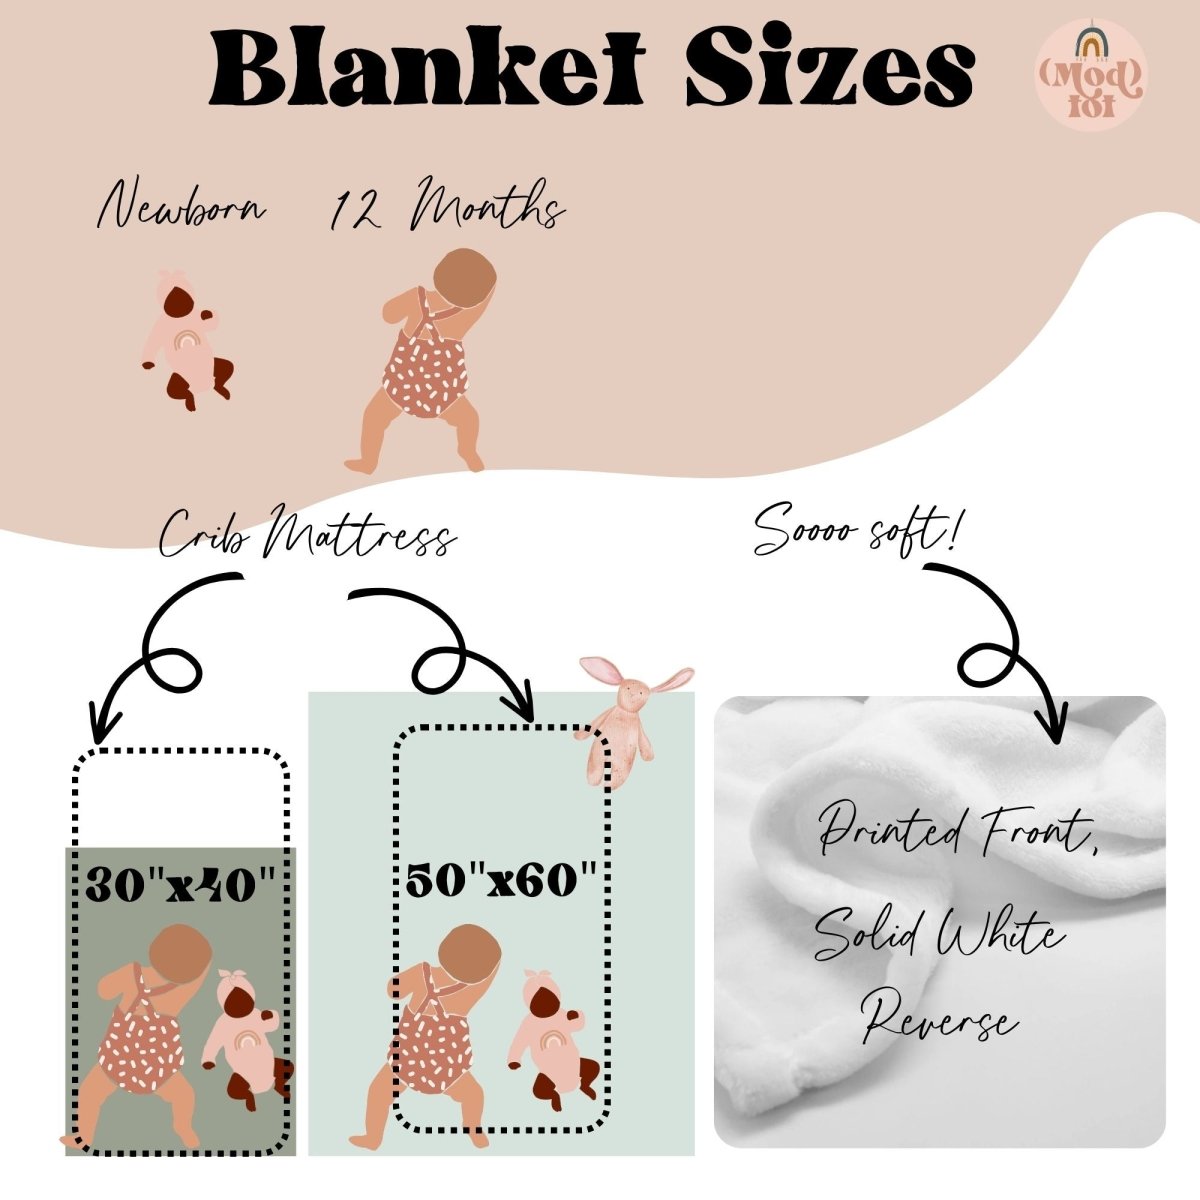 Soft Boho Floral Personalized Baby Blanket - gender_girl, Personalized_Yes, text